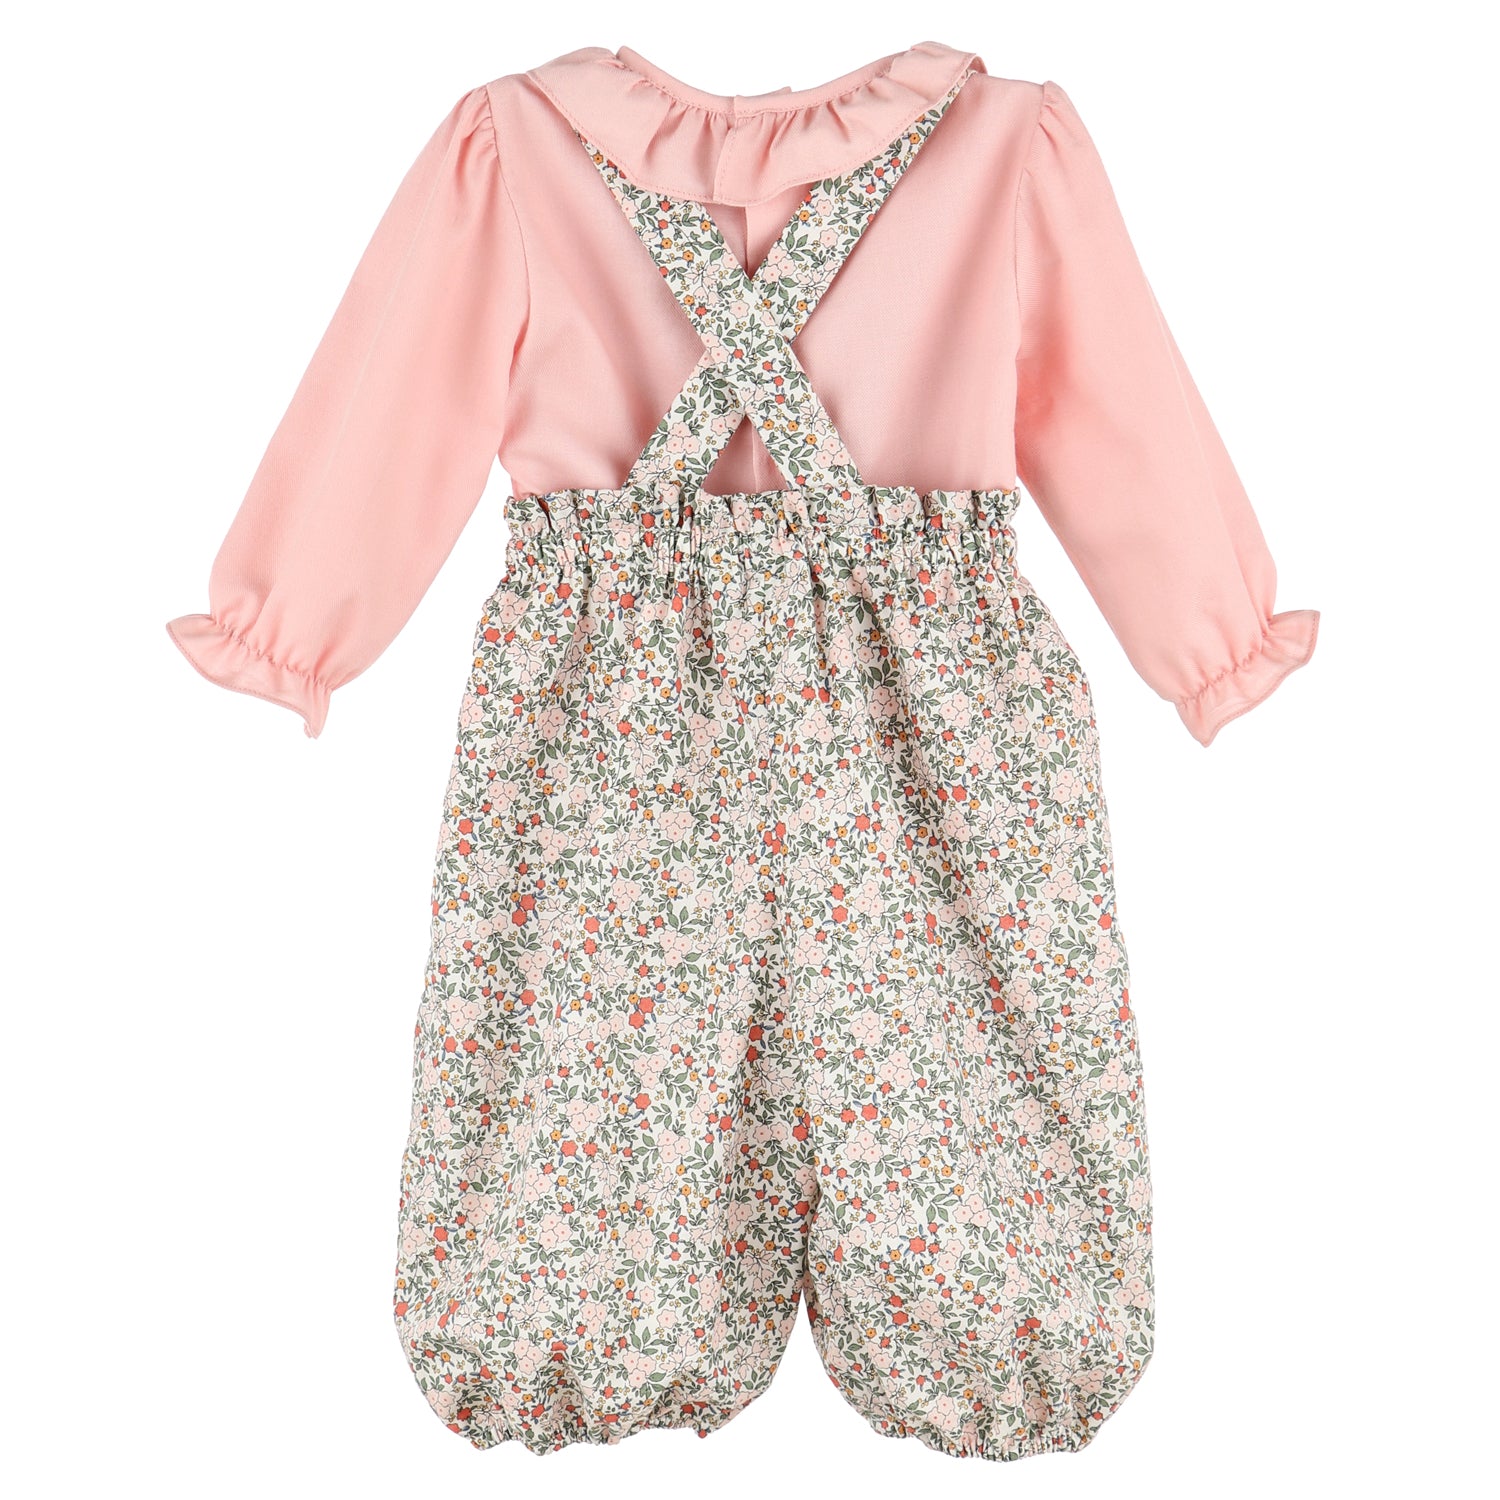 Maple Market Pink Floral Long Sleeve Overall